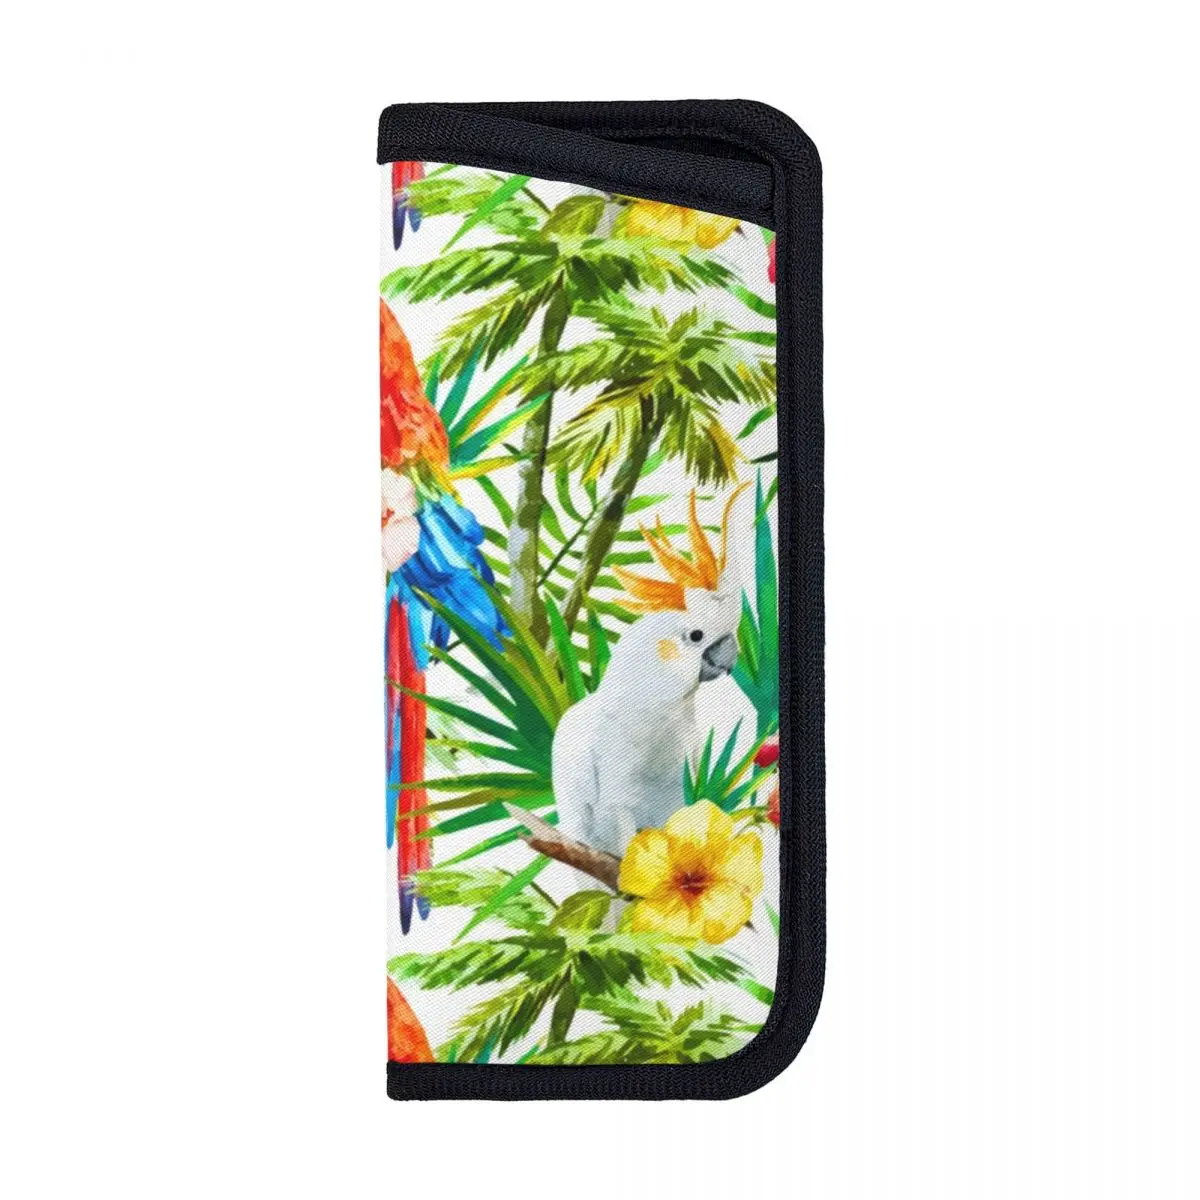 

Tropical Parrot Cockatoo And Toucan Rainforest Glasses Case Box Scarlet Macaw Exotic Hawaii Jungle Birds Vintage Eyeglasses Box